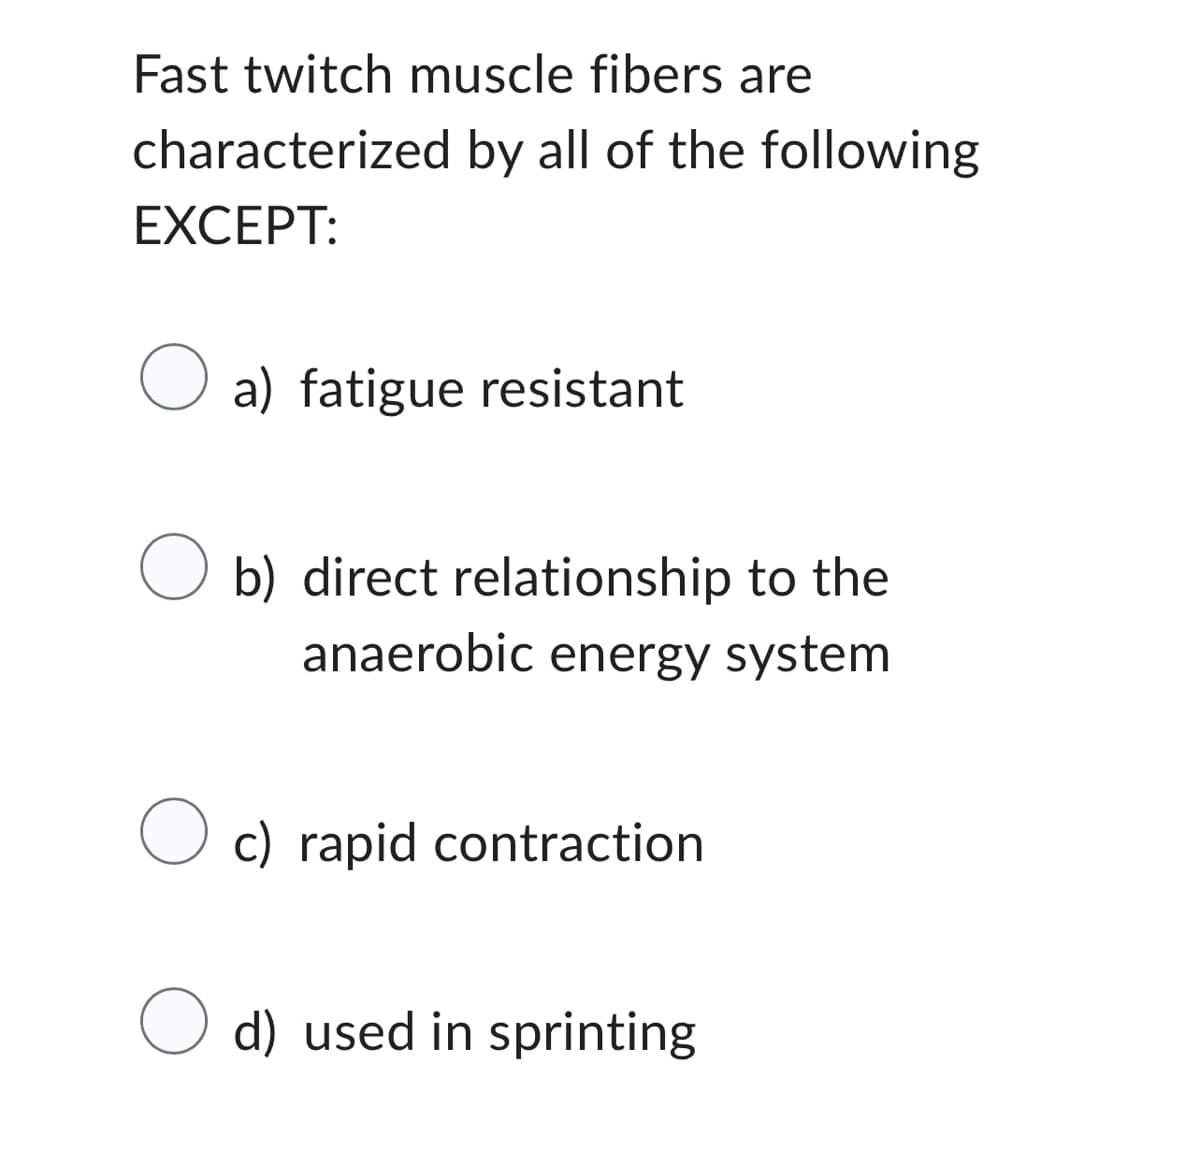 Fast twitch muscle fibers are
characterized by all of the following
EXCEPT:
a) fatigue resistant
O b) direct relationship to the
anaerobic energy system
O c) rapid contraction
O d) used in sprinting